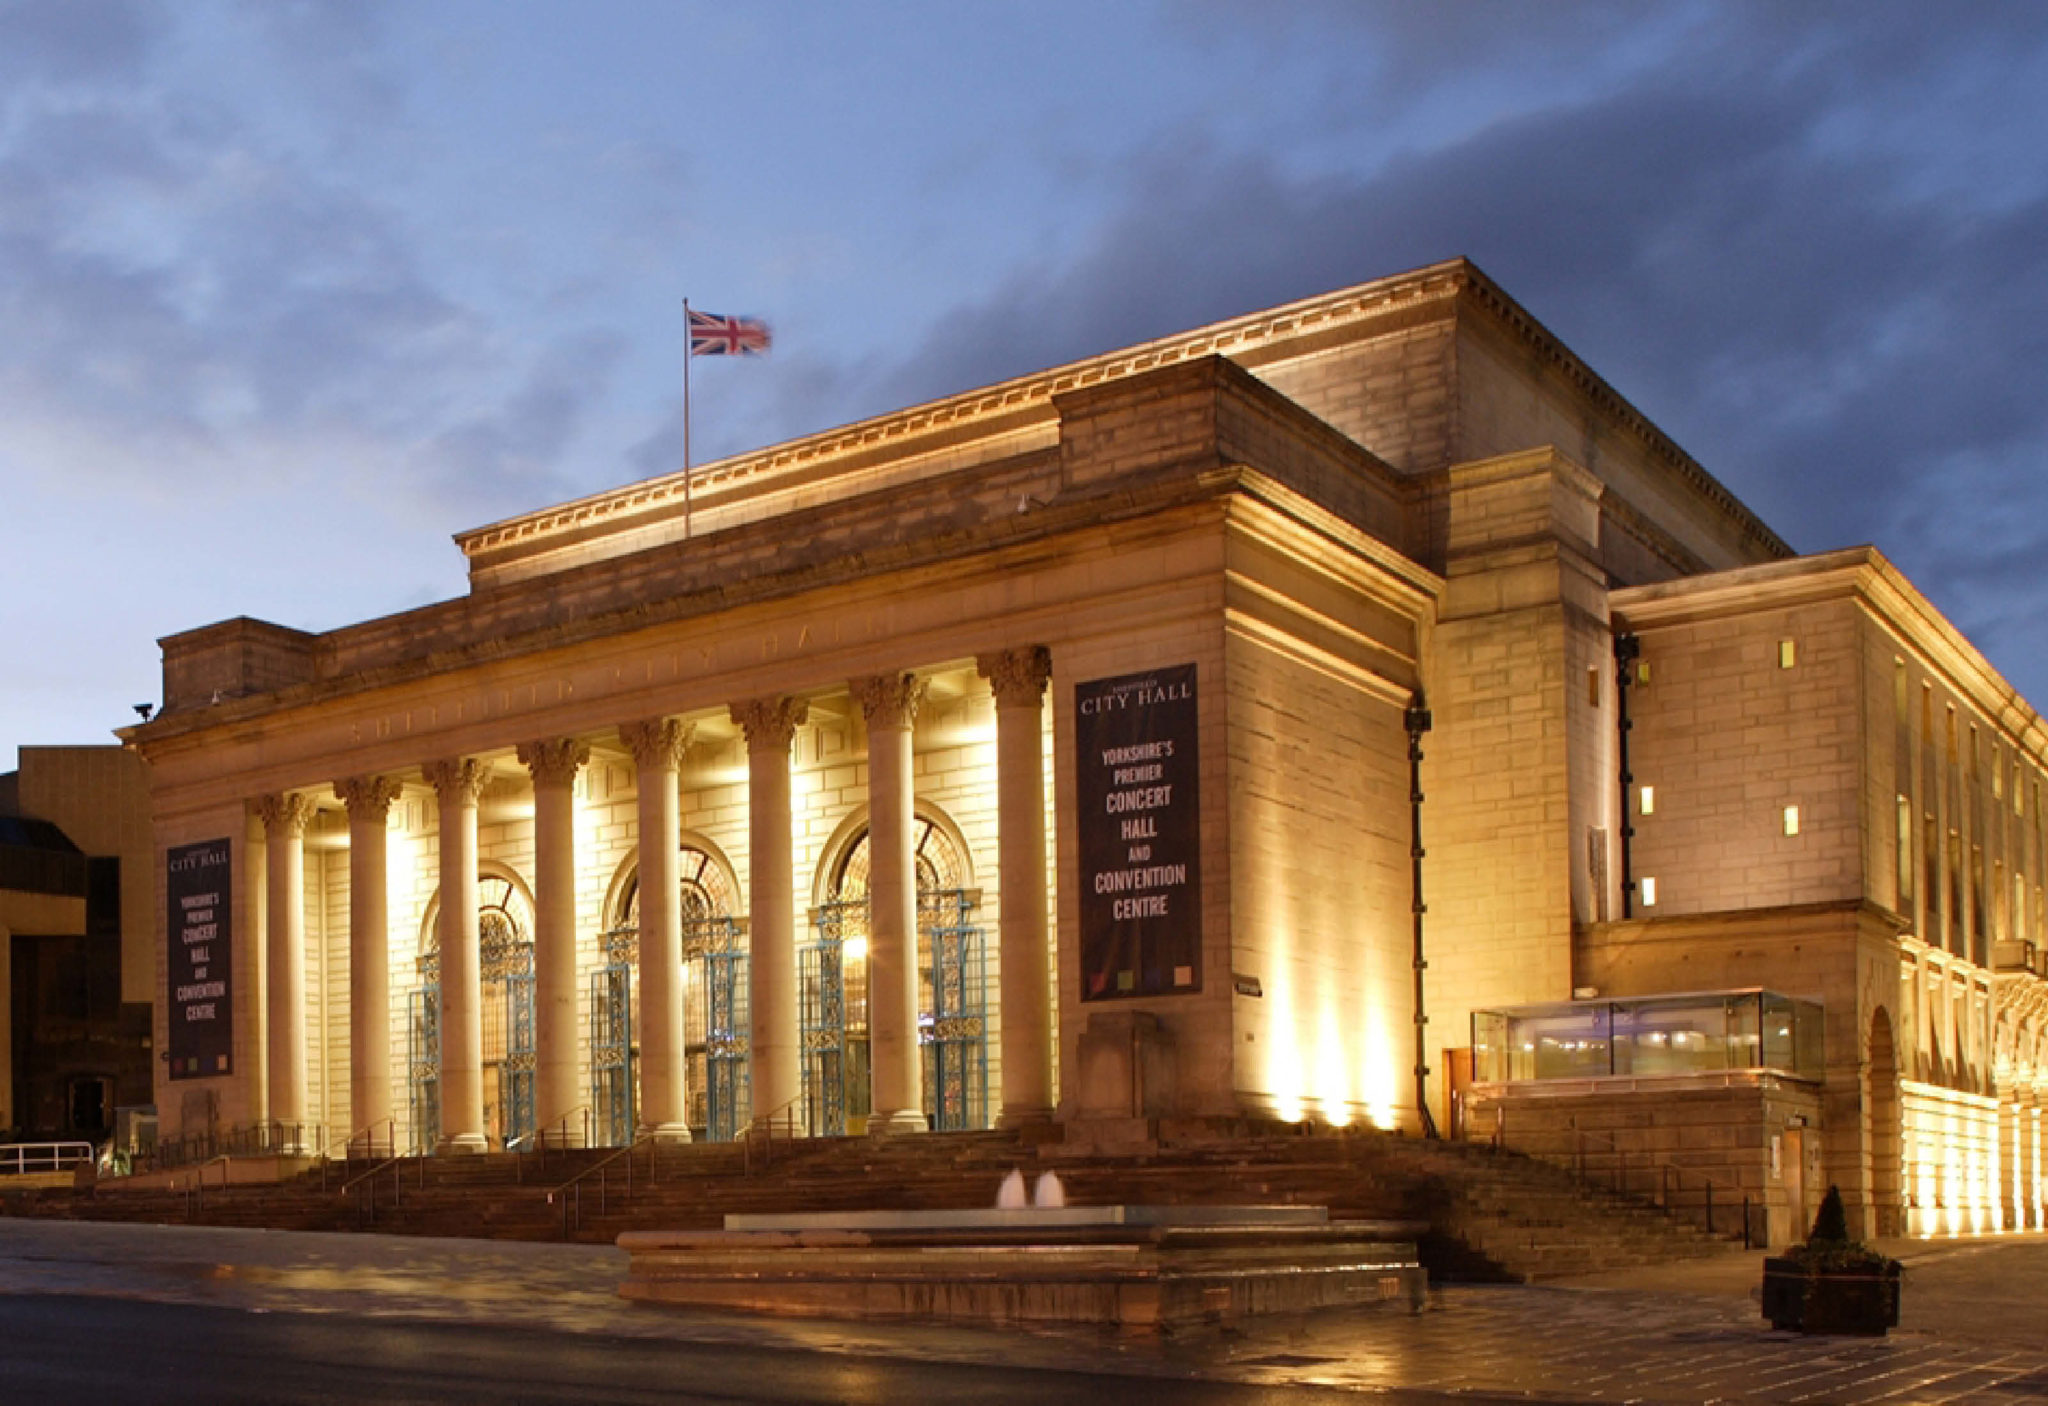 sheffield city hall, city, council, uk, cctv, cctv monitoring, surveillance, public space, welfare, security, security systems, control room, security design